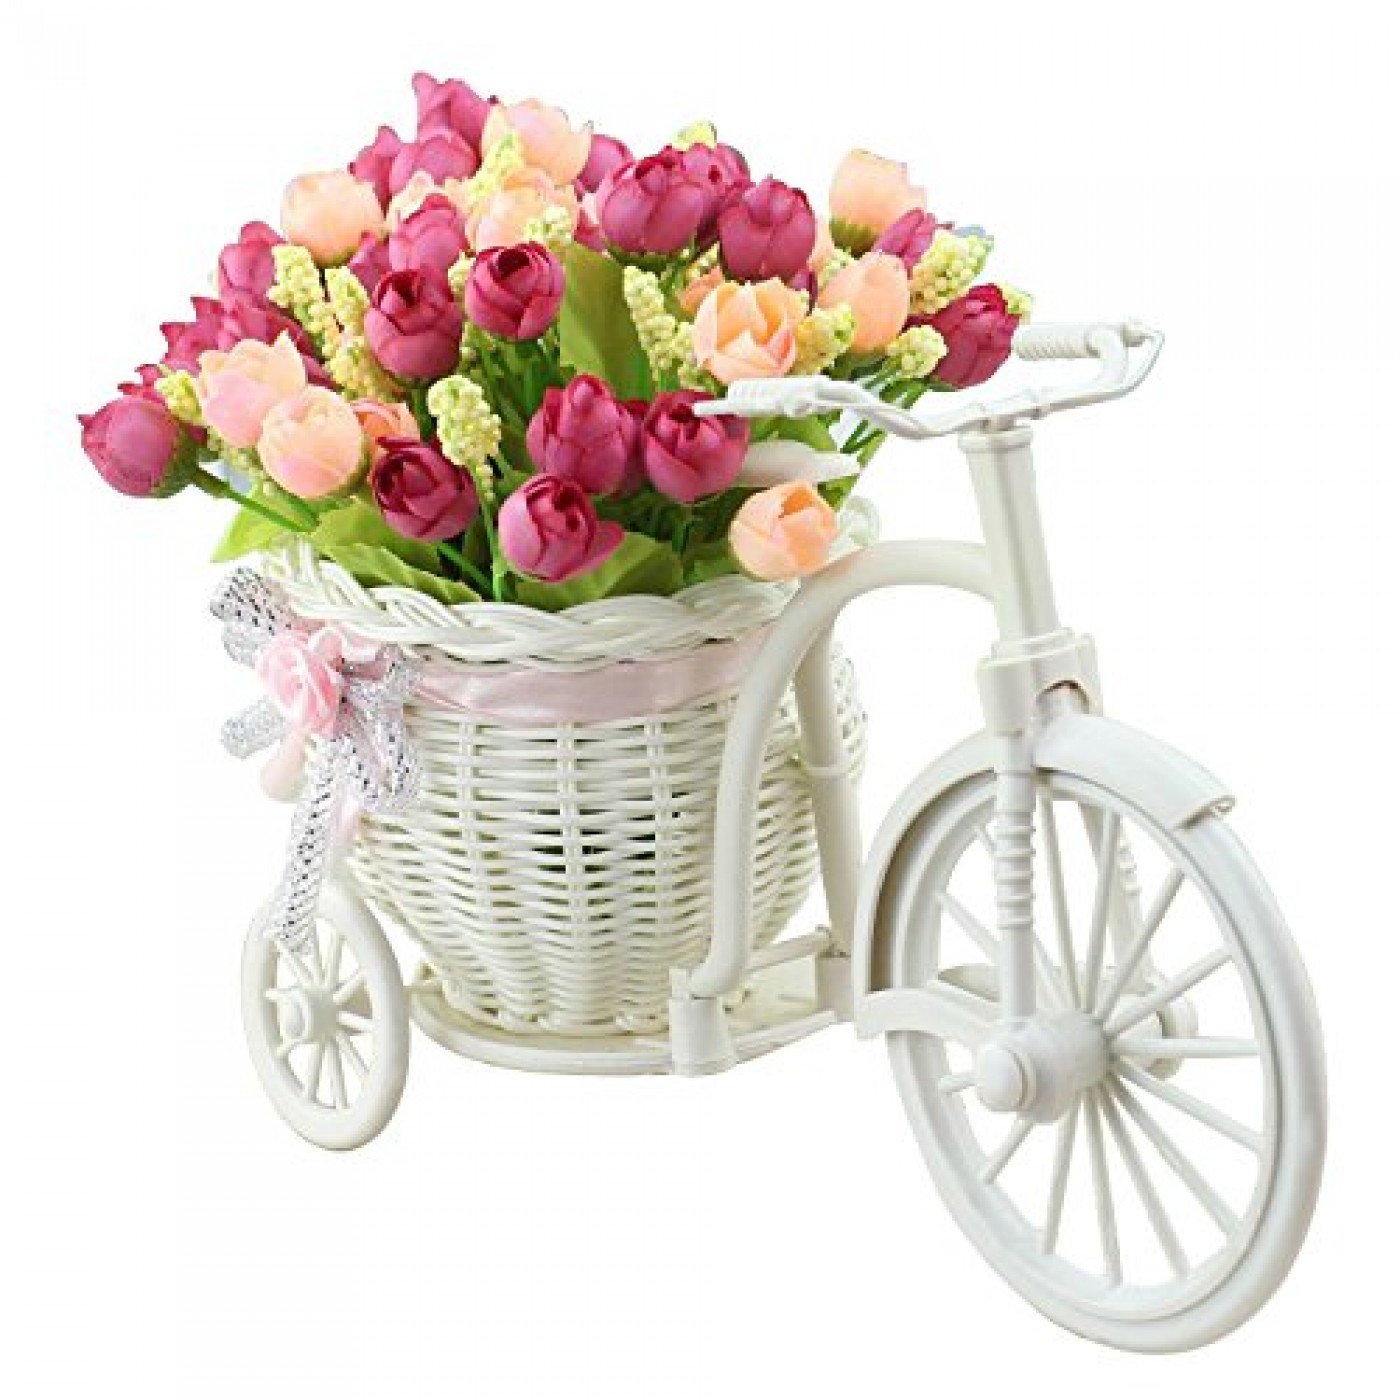 Cycle shape Flower Vase with Peonies Bunches